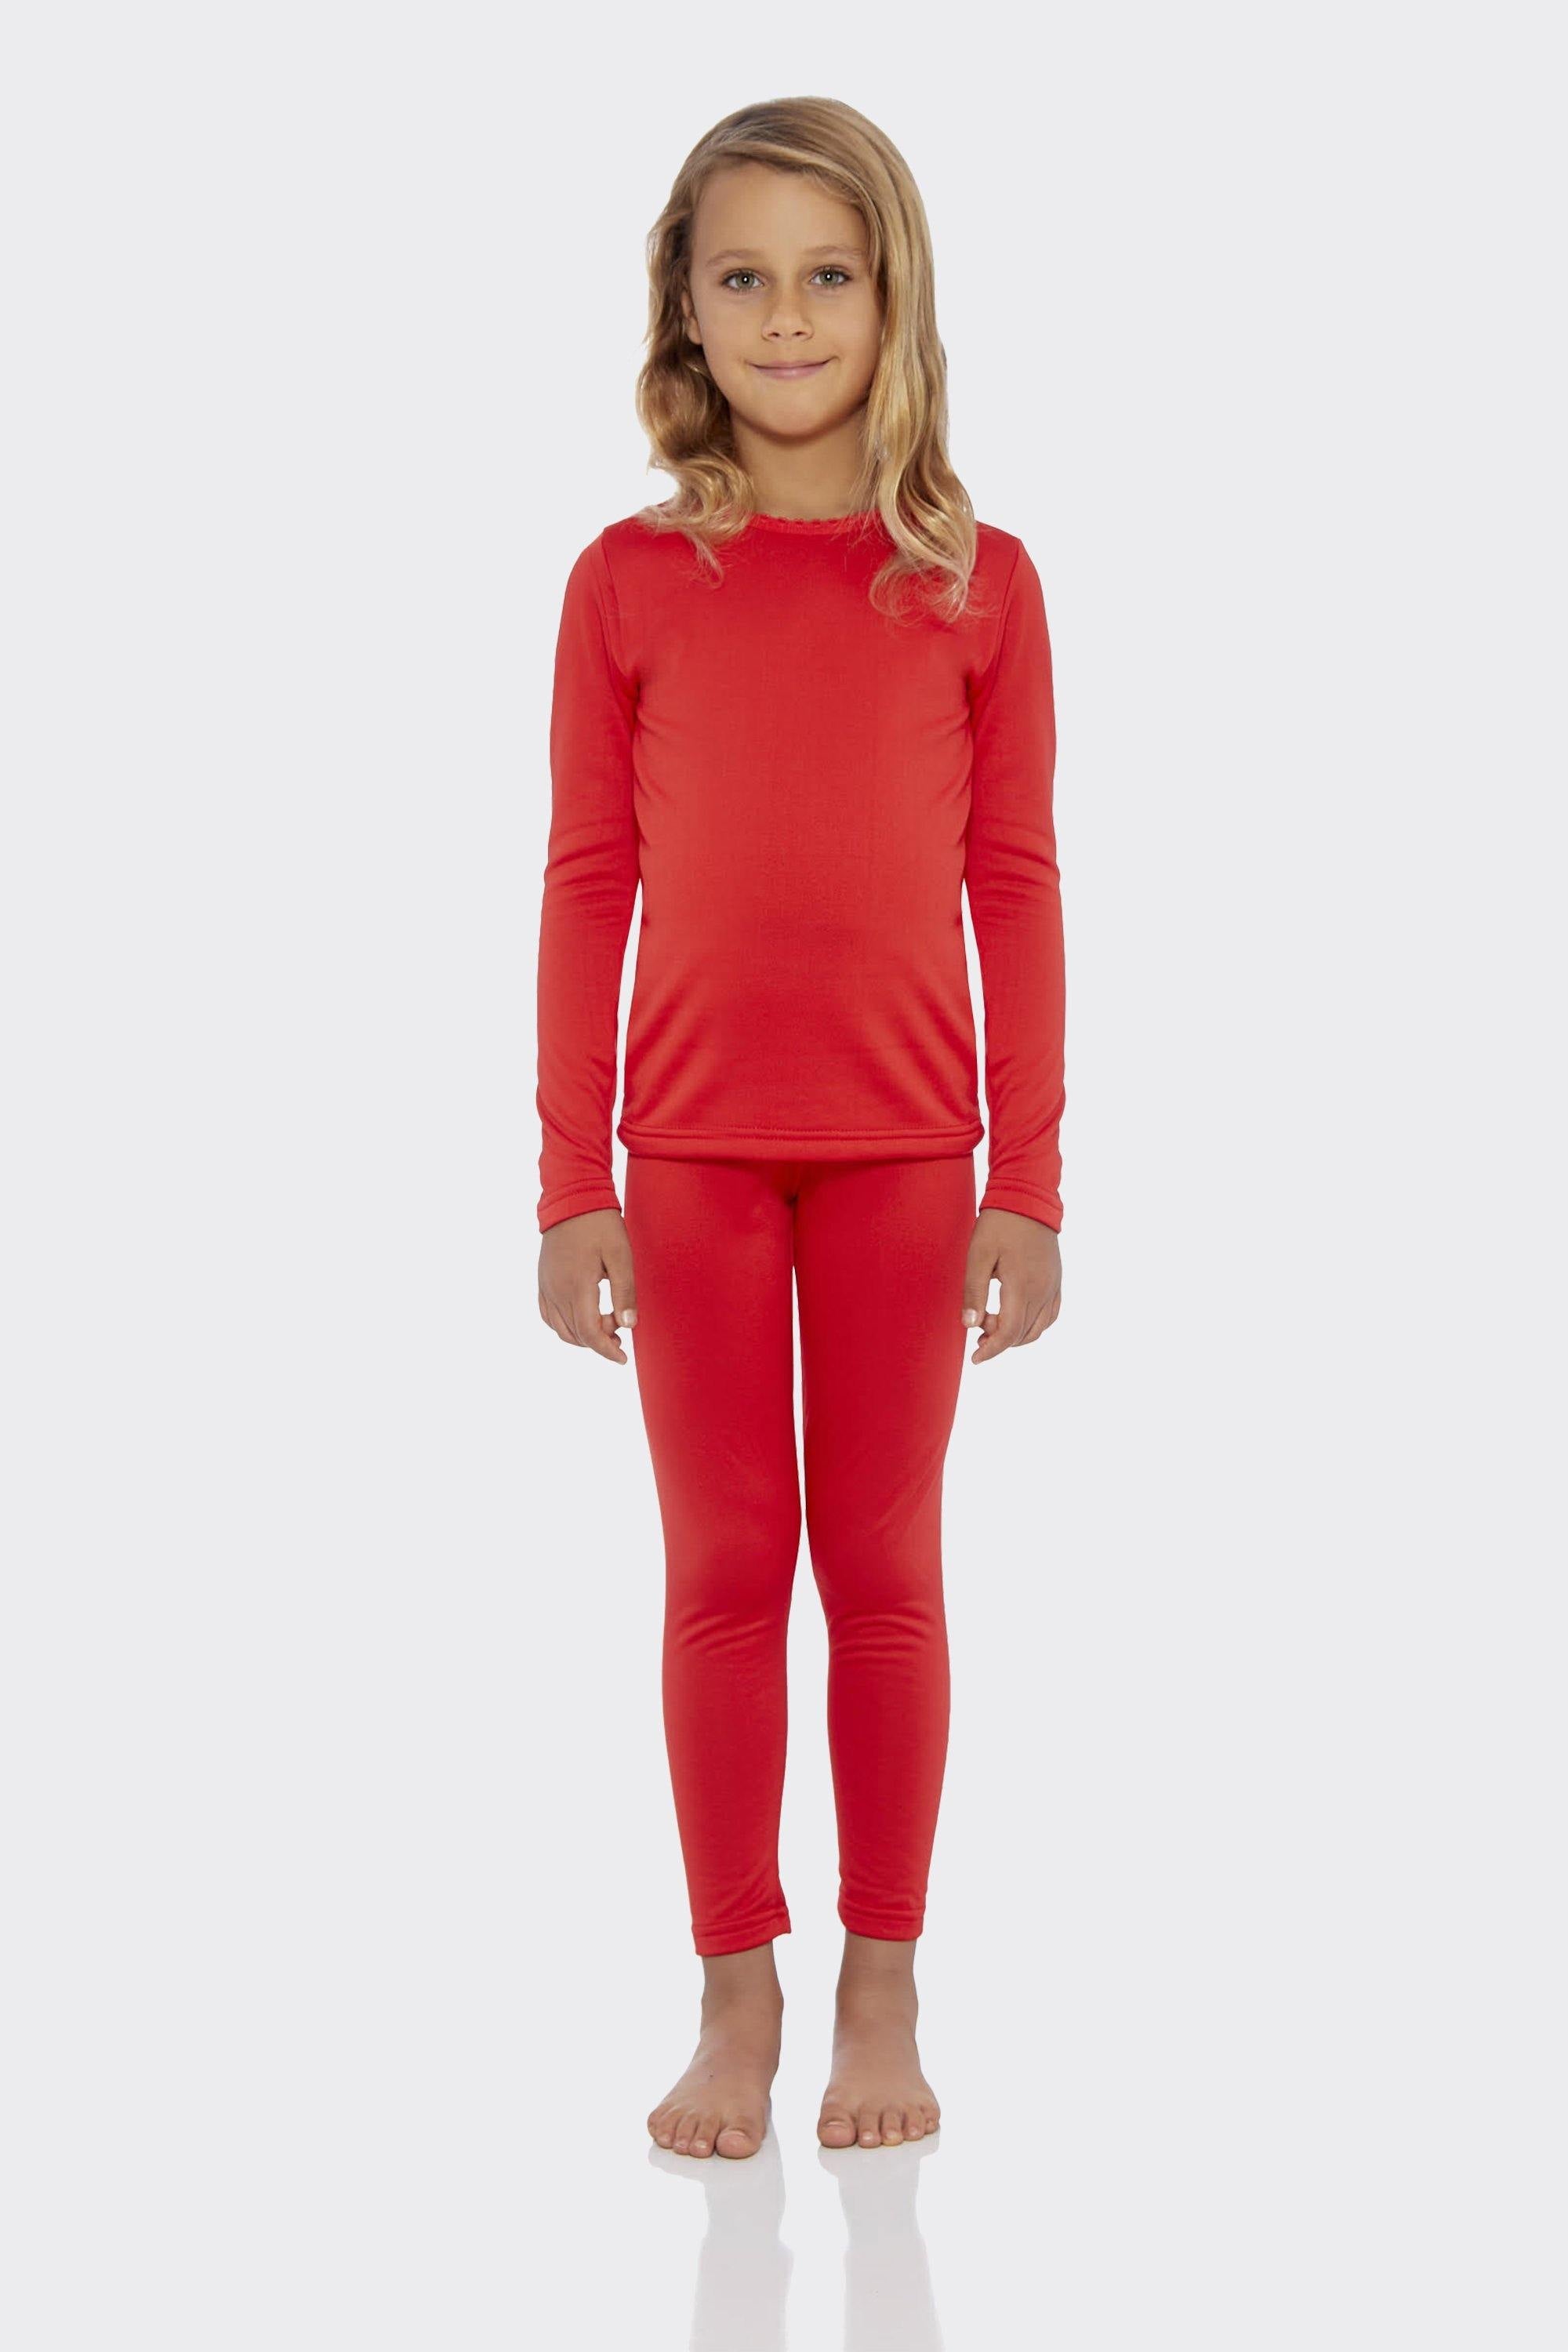 Girls Solid Thermal Set